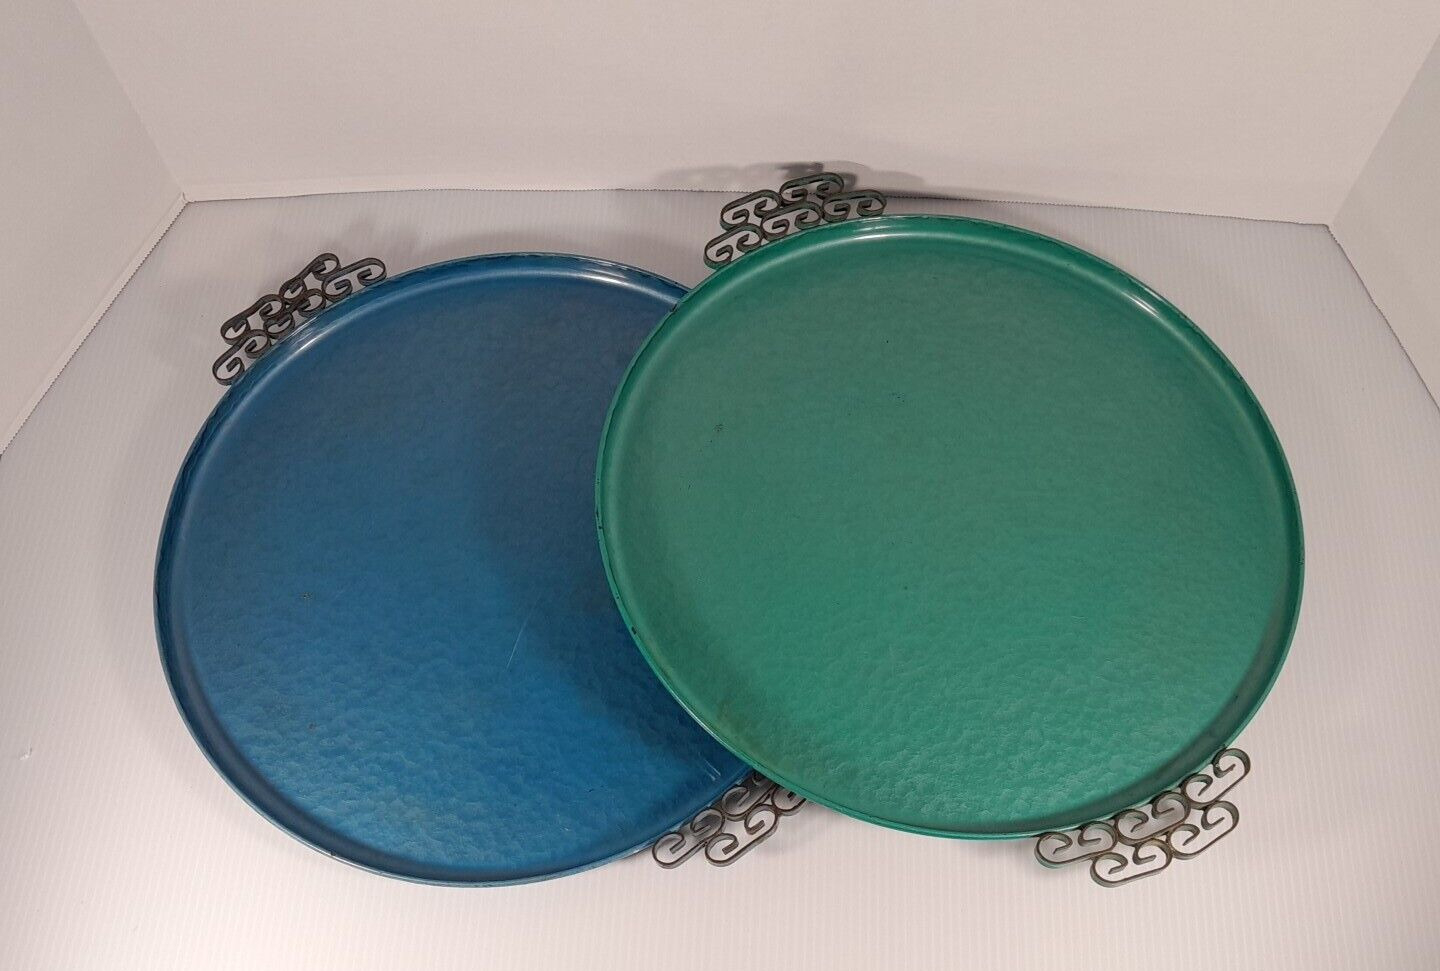 2 Vtg MCM Moire Glaze Kyes Serving Tray Round w/ Handles Turquoise Green